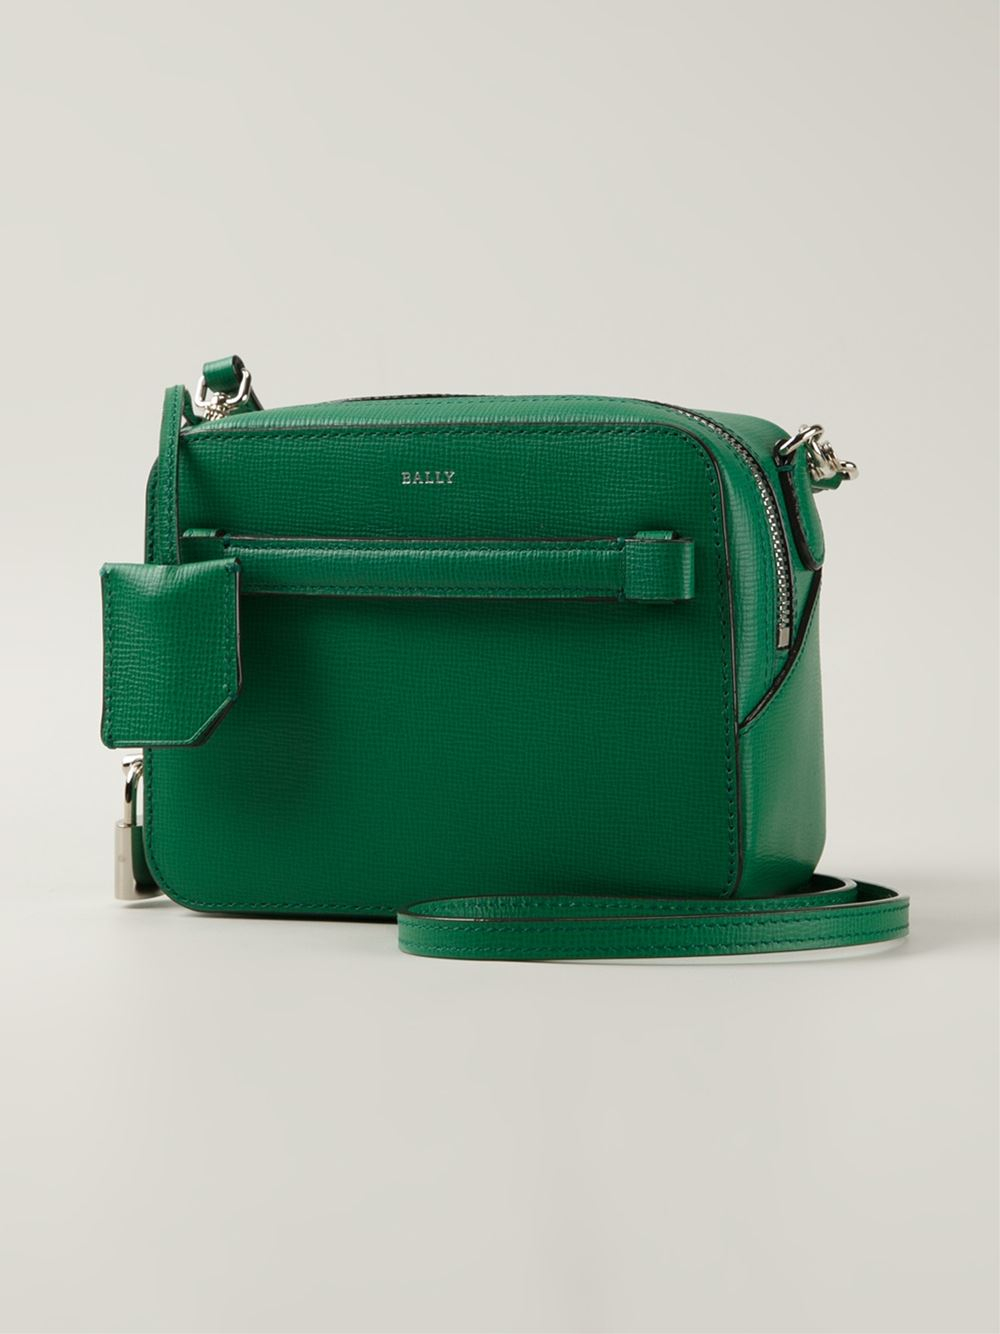 Bally Small Calf-Leather Cross-Body Bag in Green - Lyst